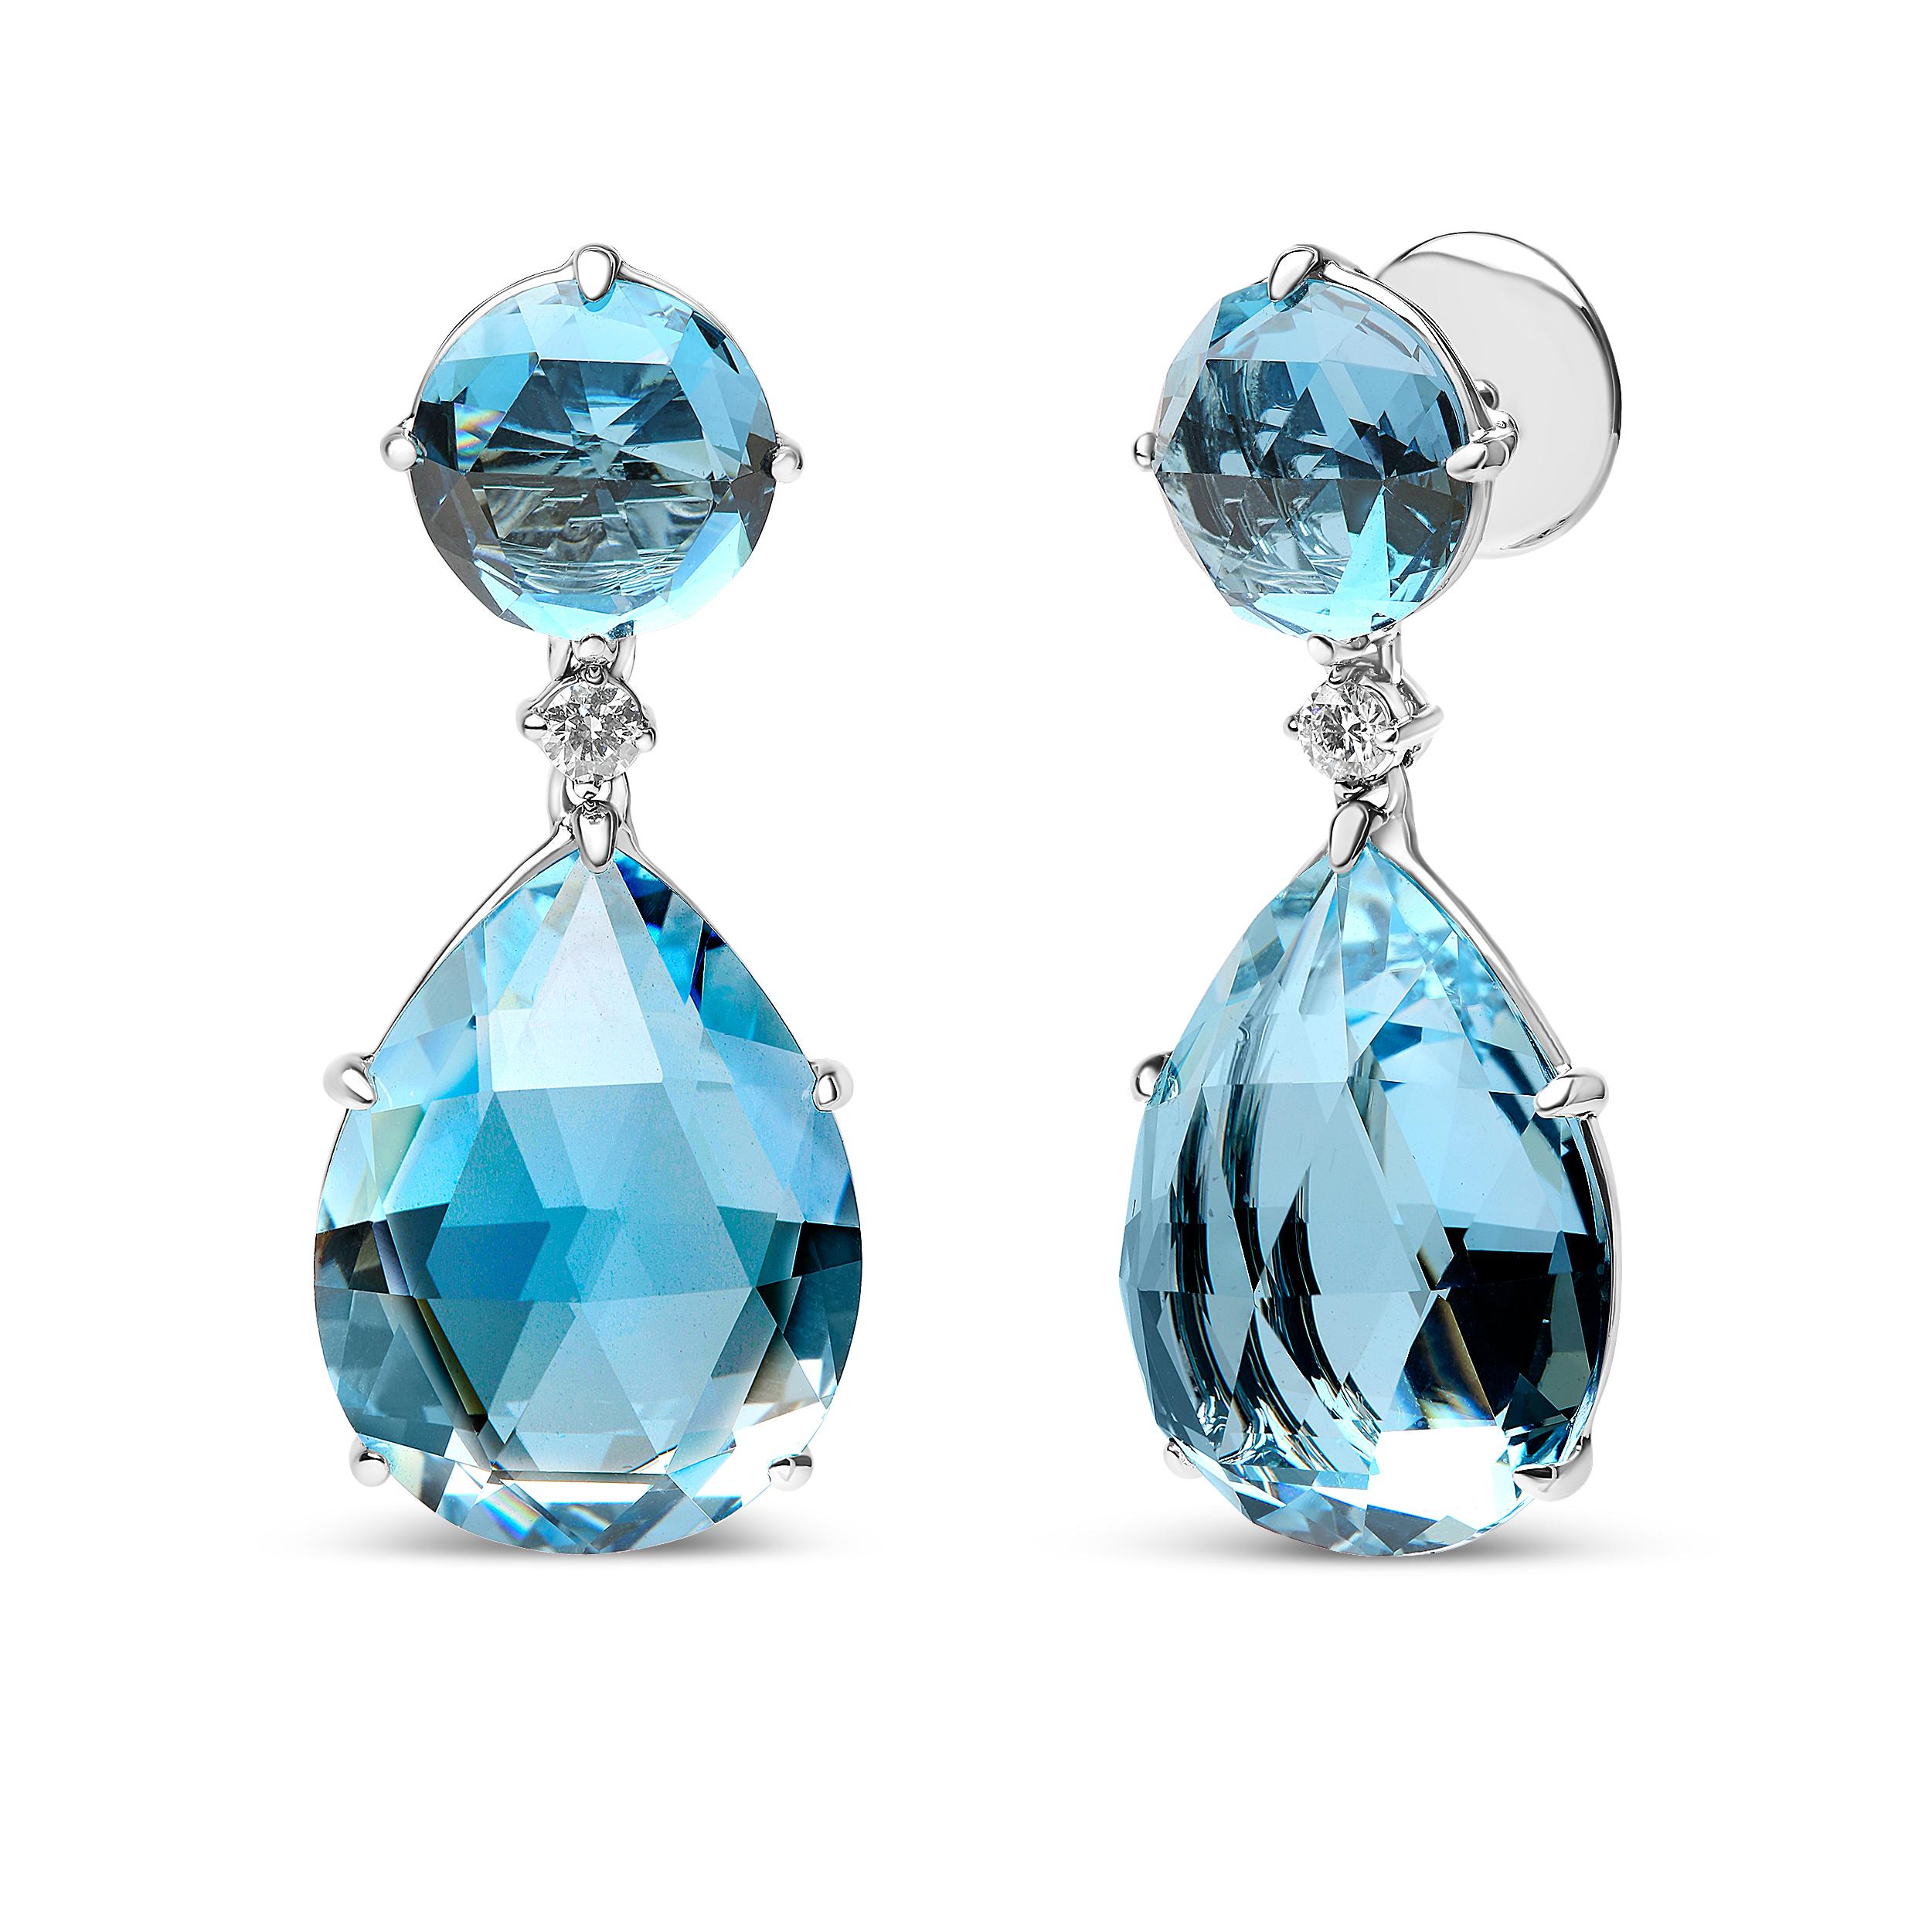 These attractive dangle earrings cultivate a sophisticated style in genuine 18k white gold with natural gemstones and diamonds in a linear design. The upper dangle shows off with a gleaming round color-treated London blue topaz gemstone in a prong